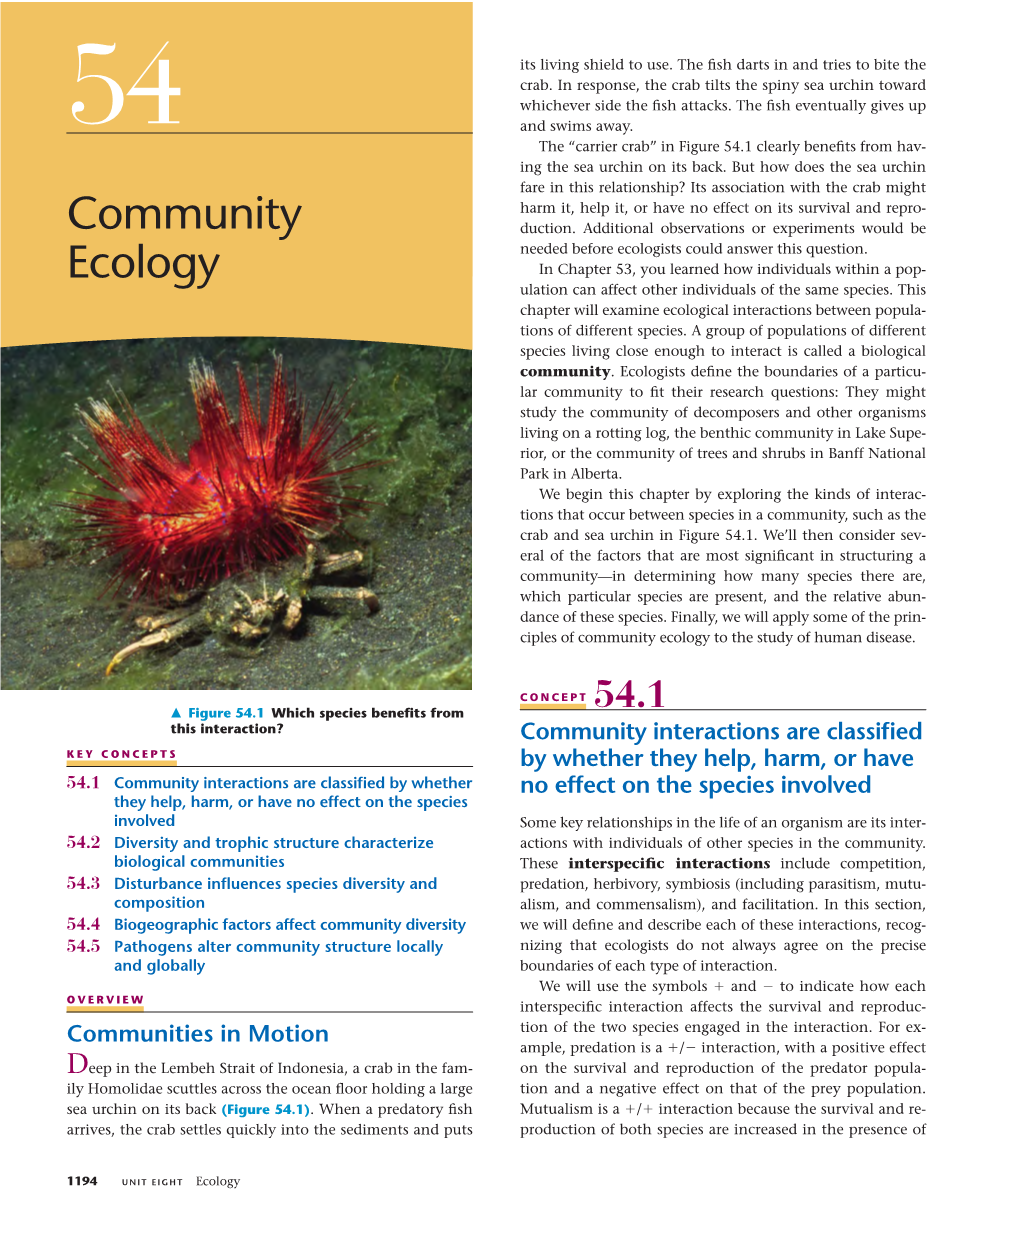 Community Ecology to the Study of Human Disease